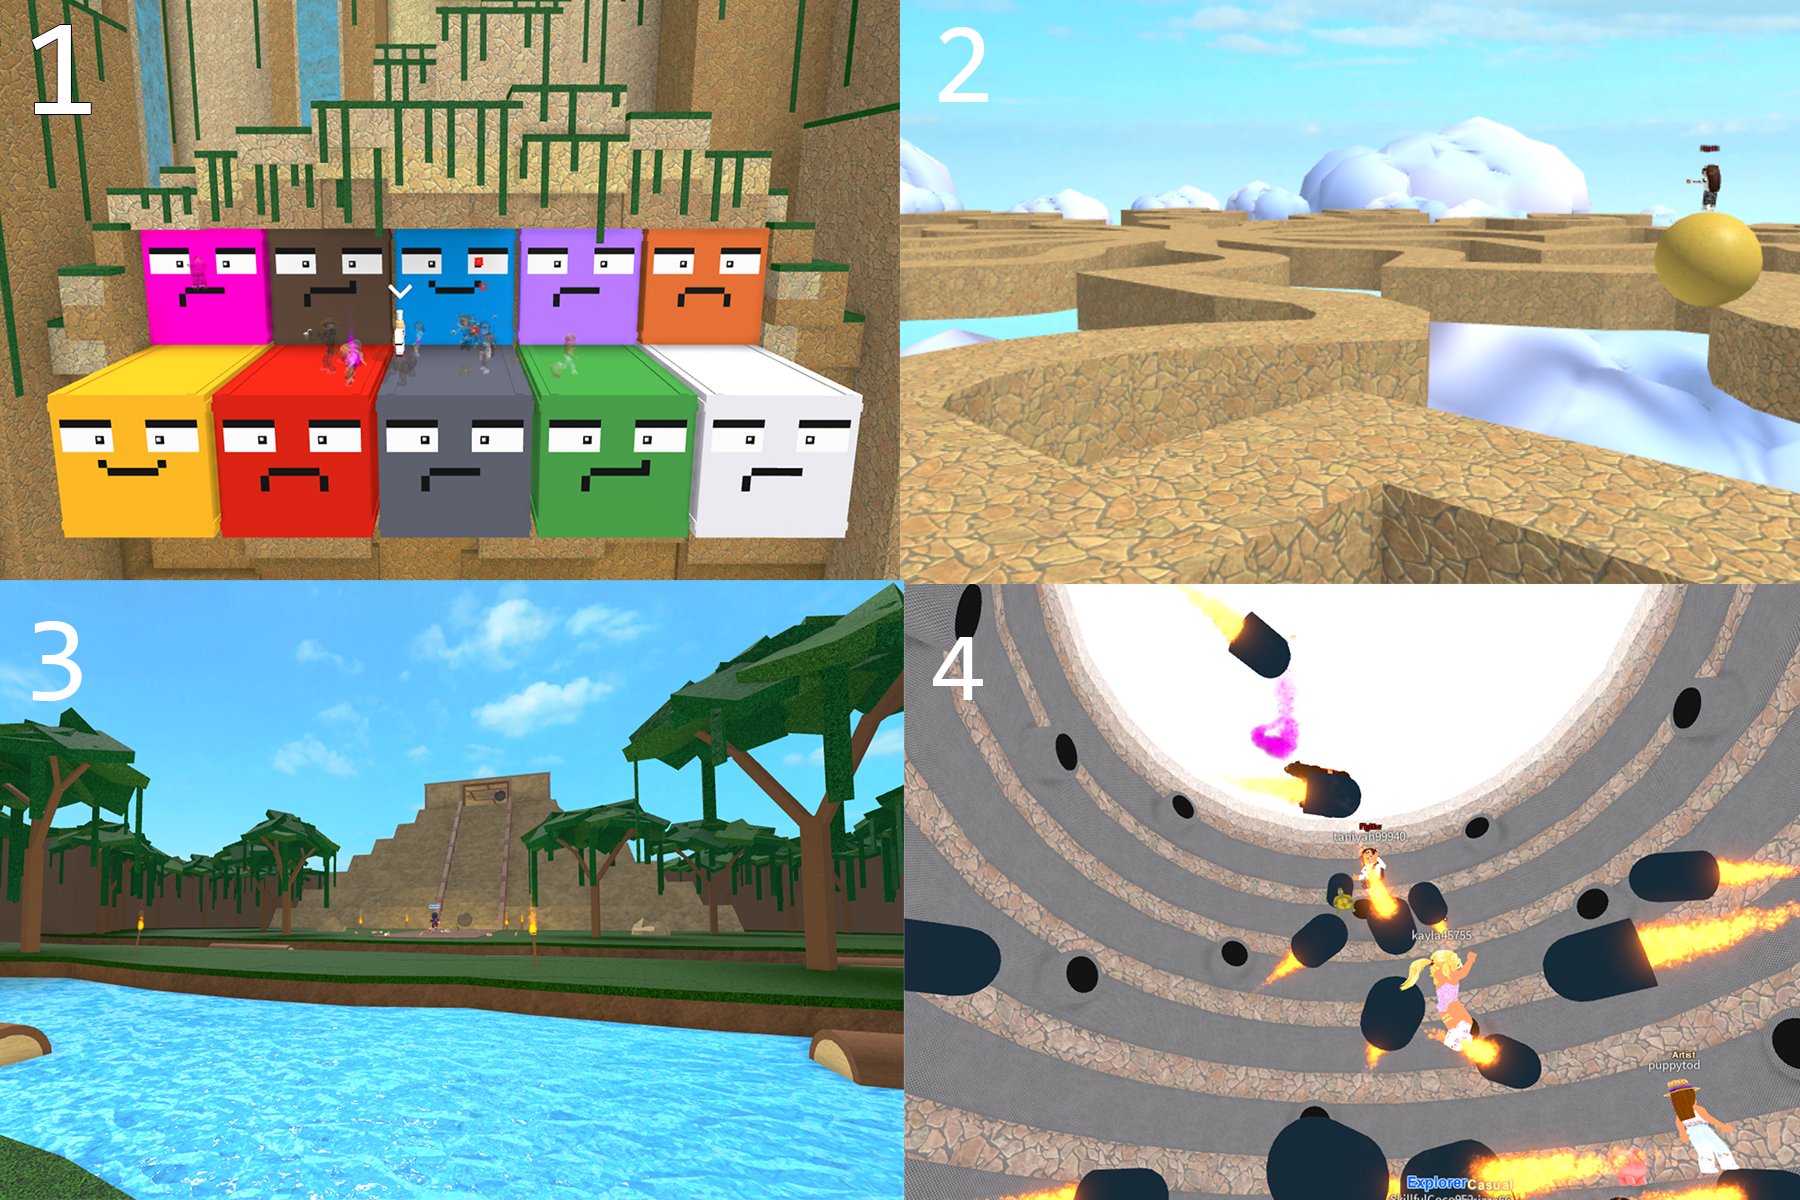 Roblox On Twitter You Re On A Desert Island With Bad Wifi You Can Only Bring One Of These Epic Minigames By Typicalrblx With You Which Do You Pick Https T Co Cimbhmpzq0 - i suck at roblox minigames roblox epic minigames